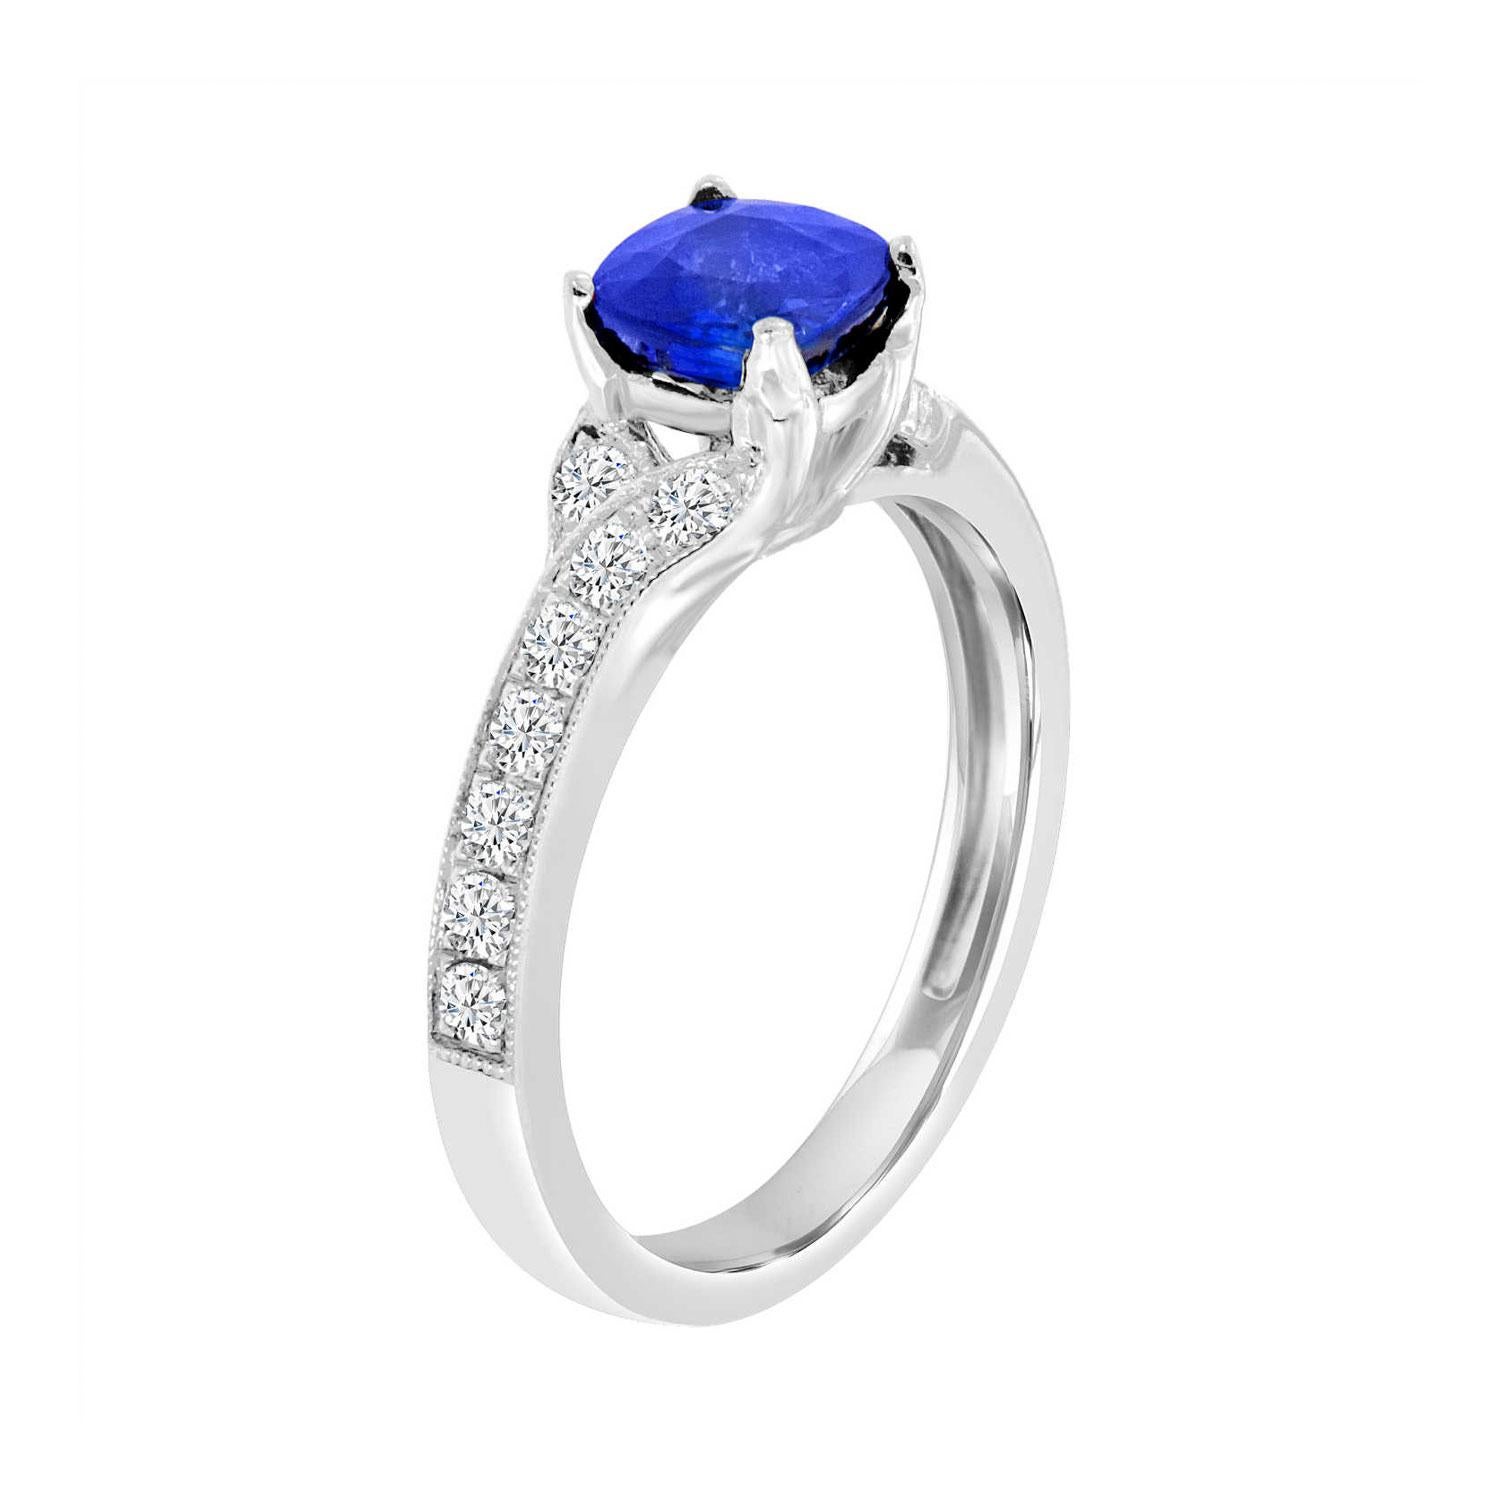 This vintage-inspired ring features a 1.25 Carat Square Cushion shaped Premium Blue Sapphire four prong set along a leaf design shank with a touch of milgain on its edge. The pave' set diamond along the shank ad a dazzling effect. Experience the